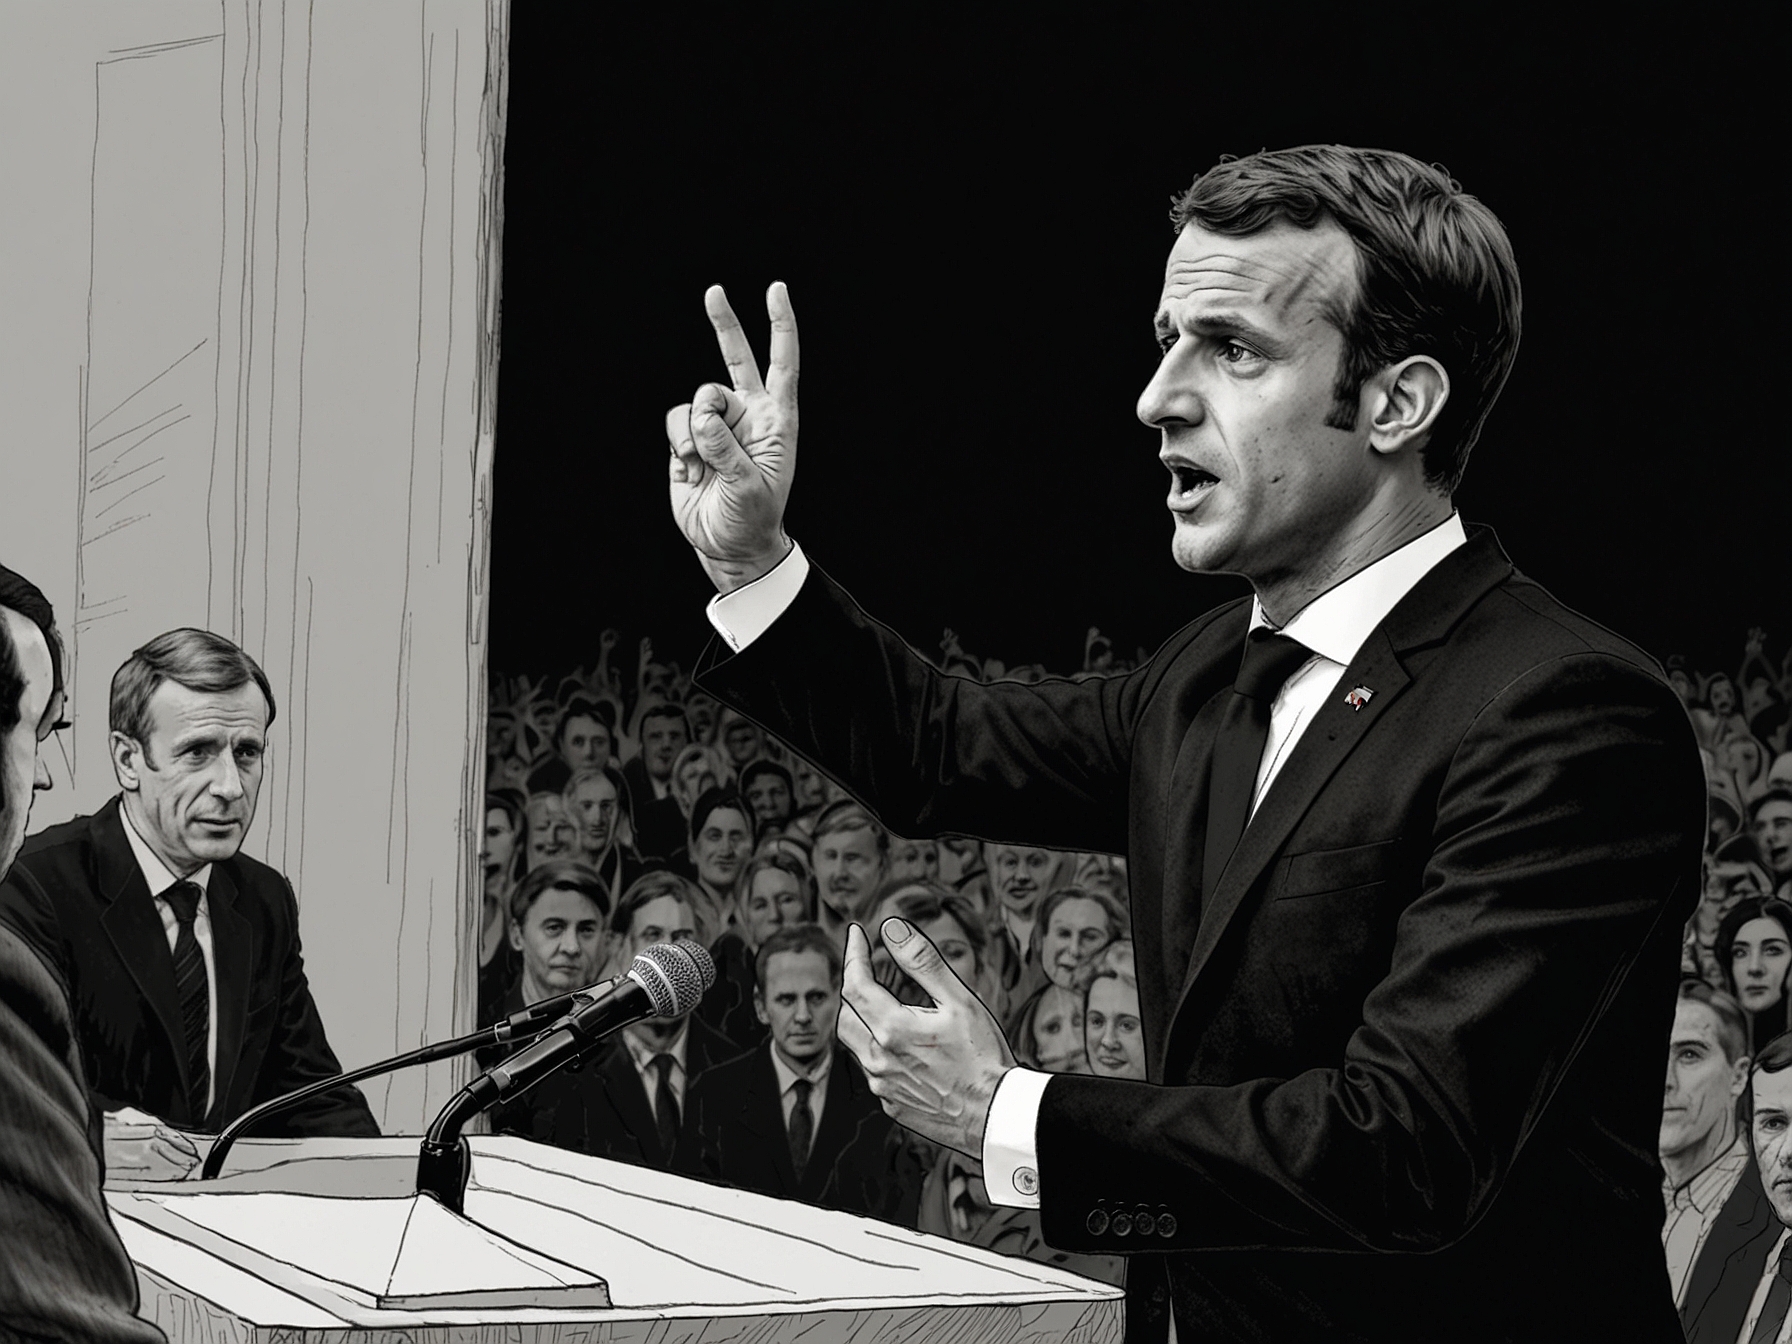 Emmanuel Macron addressing the public, illustrating his controversial political maneuvers and the growing discontent among French citizens.